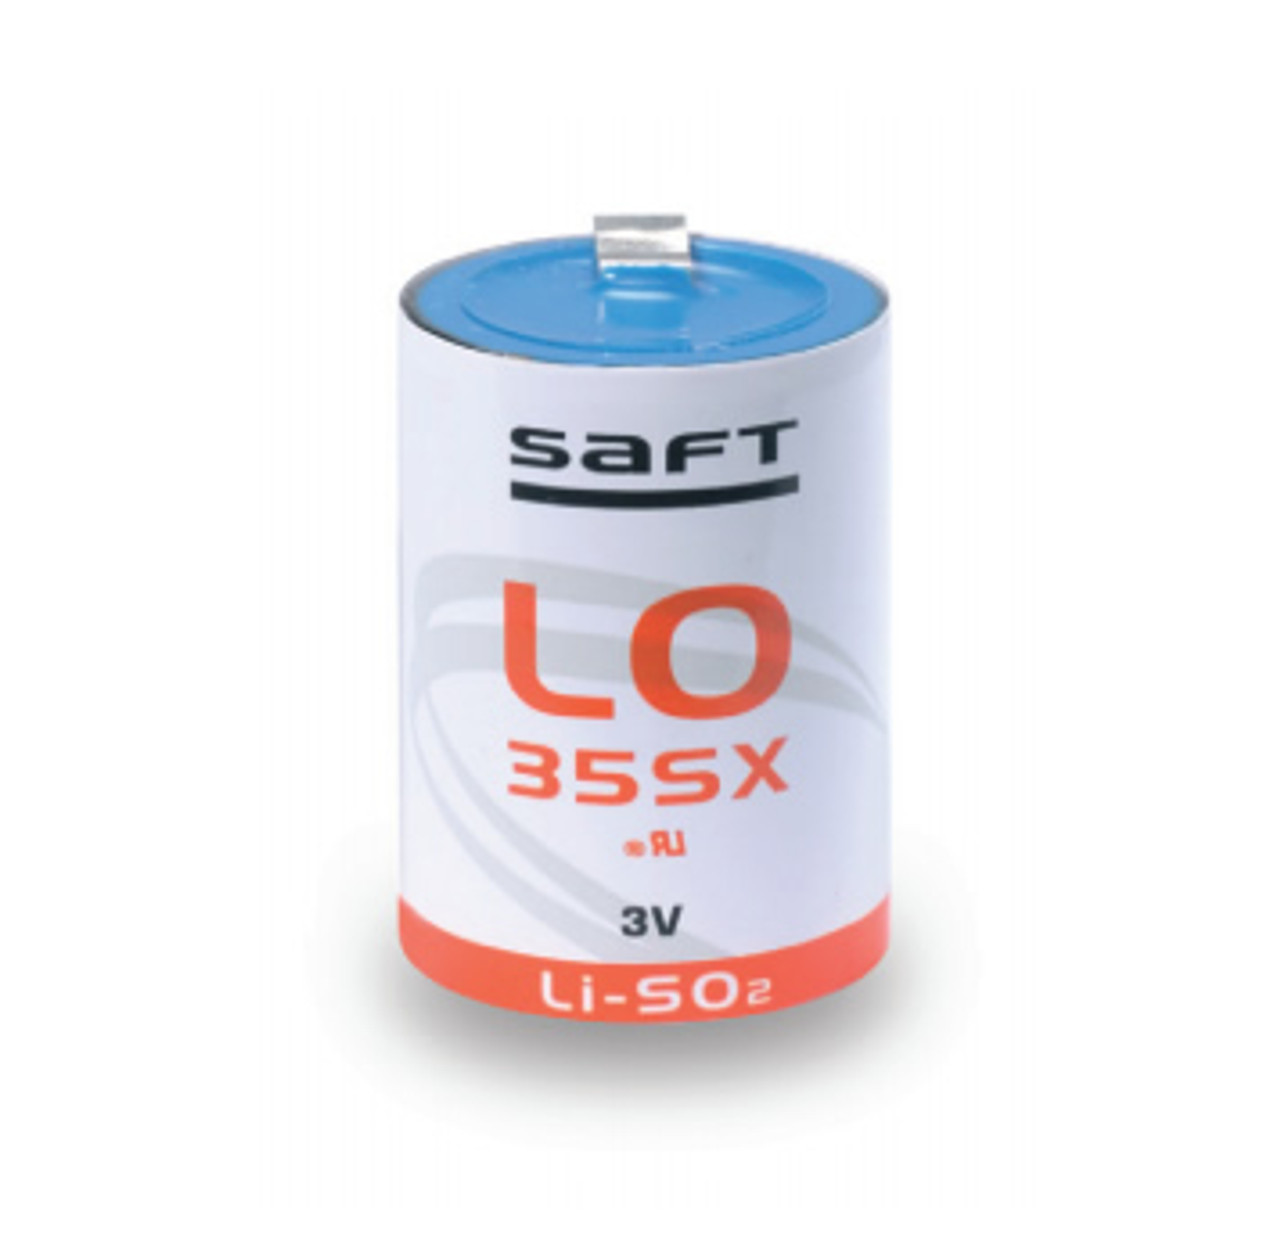 Saft LO35SX Battery - 3V Lithium 2/3 C Cell